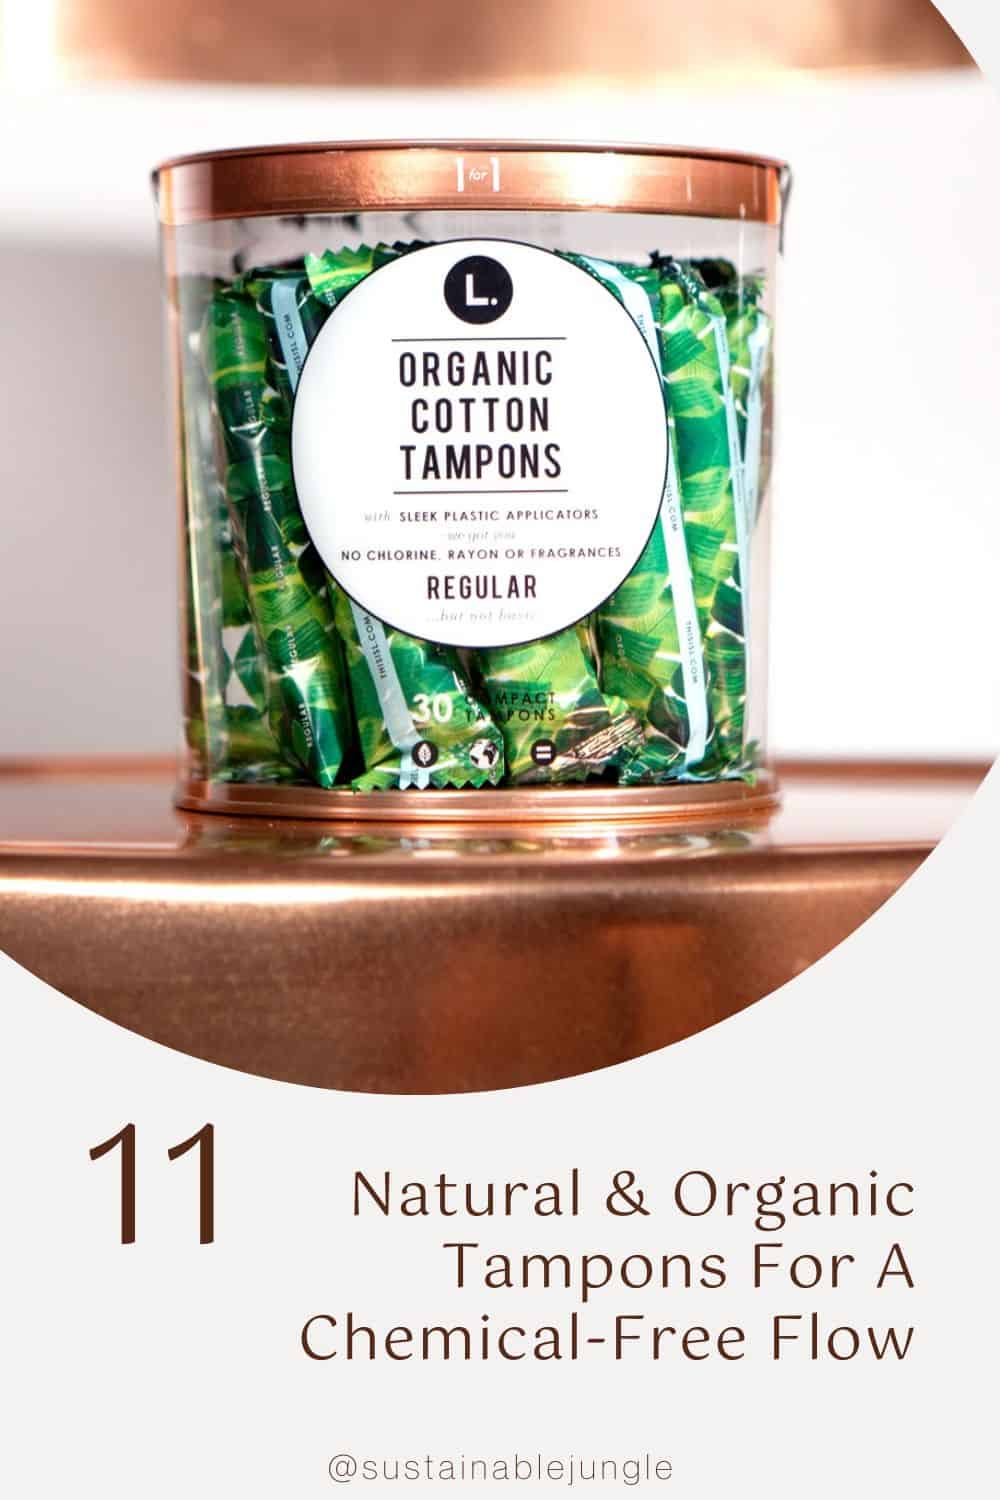 11 Natural & Organic Tampons For A Chemical-Free Flow Image by L #organictampons #bestorganictampons #organicottontampons #coraorganictampons #whyorganictampons #naturalorganictampons #sustainablejungle